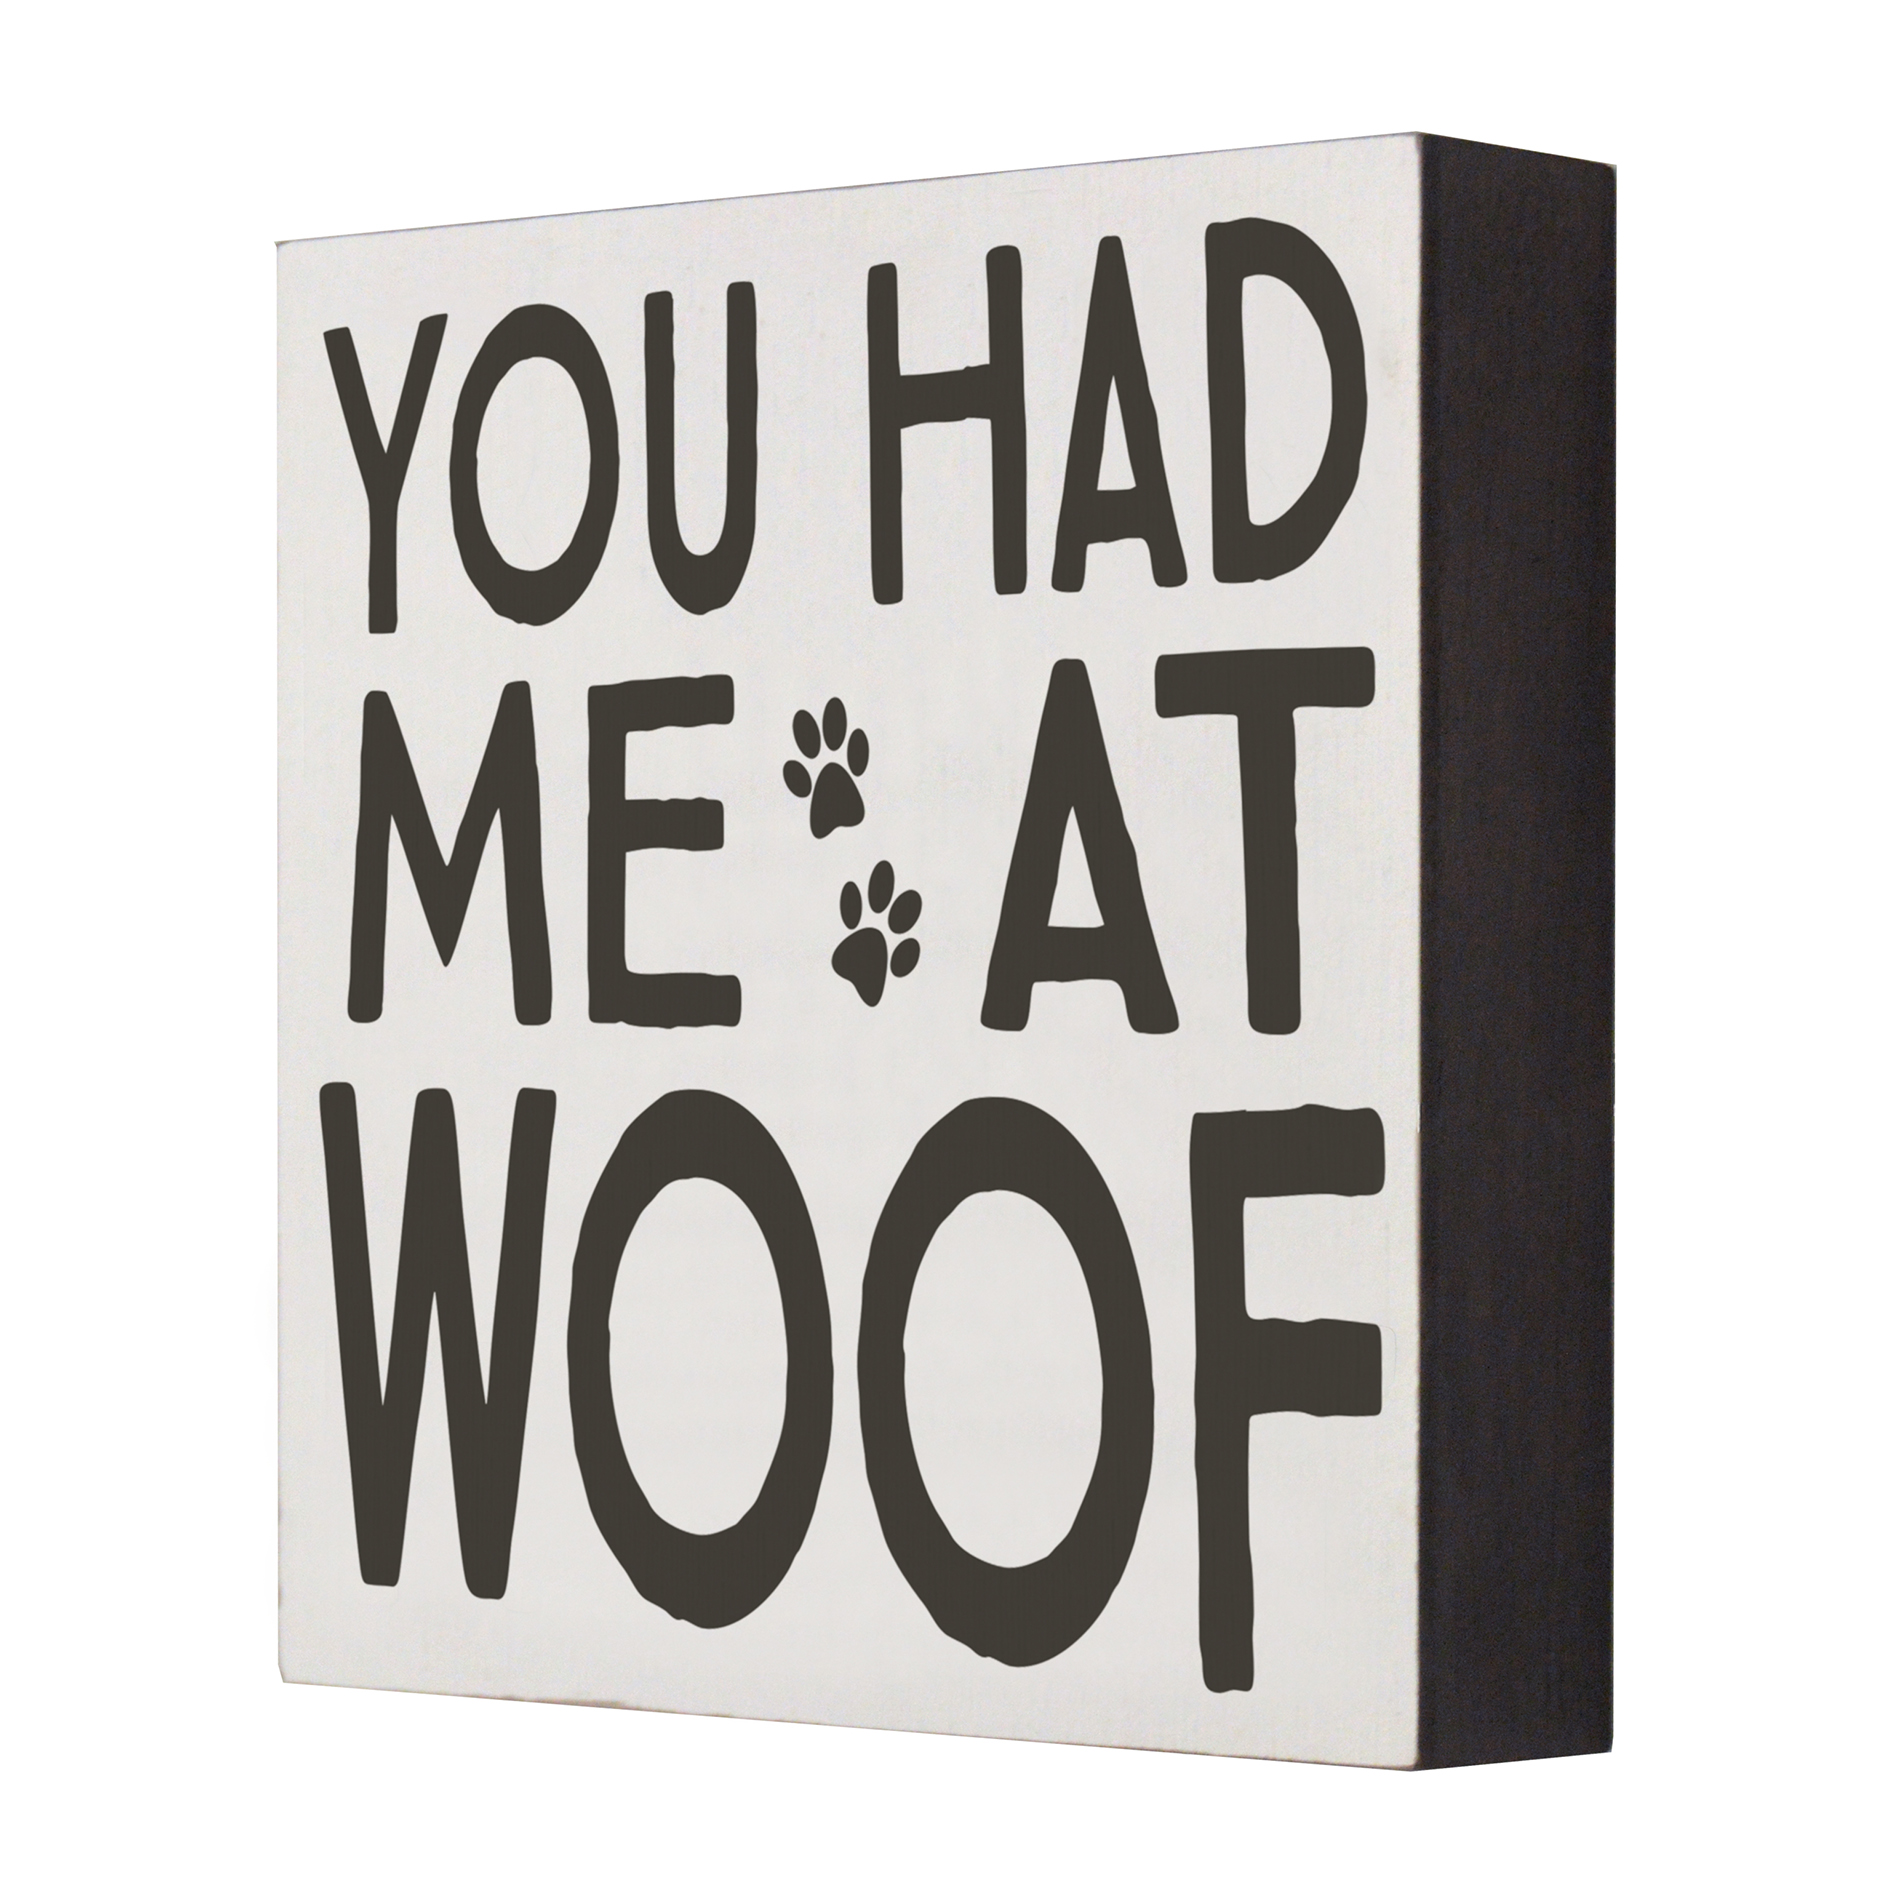 6&#8221; x 6&#8221; Wall Block - You Had Me At Woof